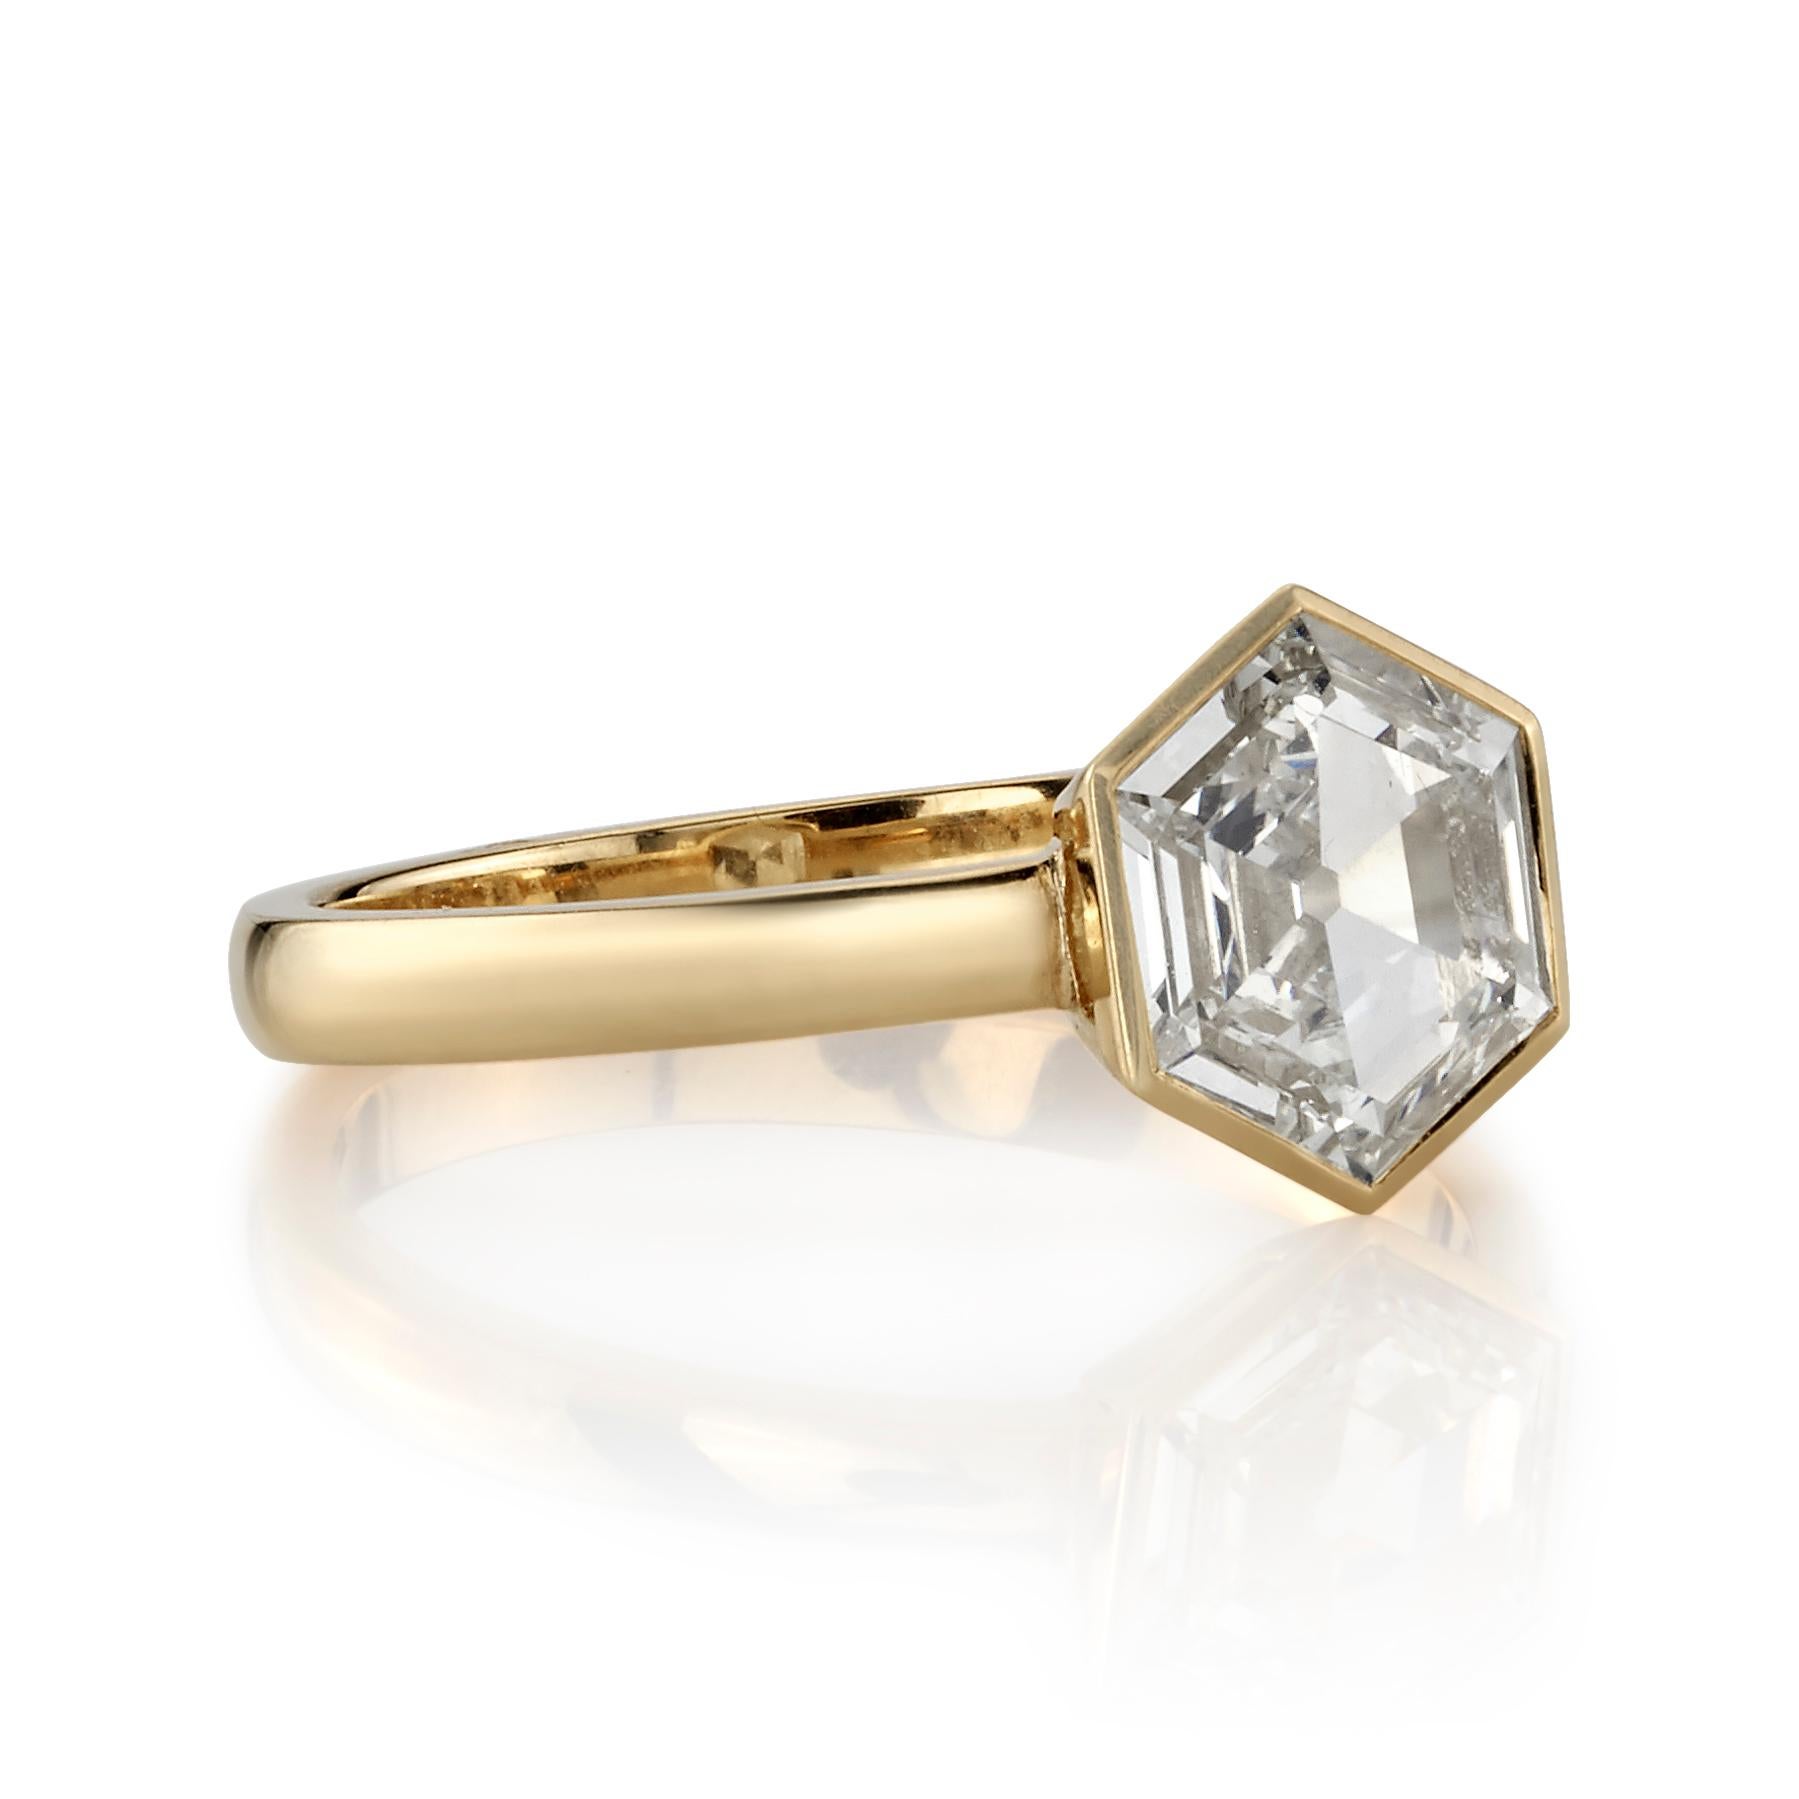 1.18ctw L/VS2 GIA certified hexagonal step cut diamond set in a handcrafted 18K yellow gold setting. 
